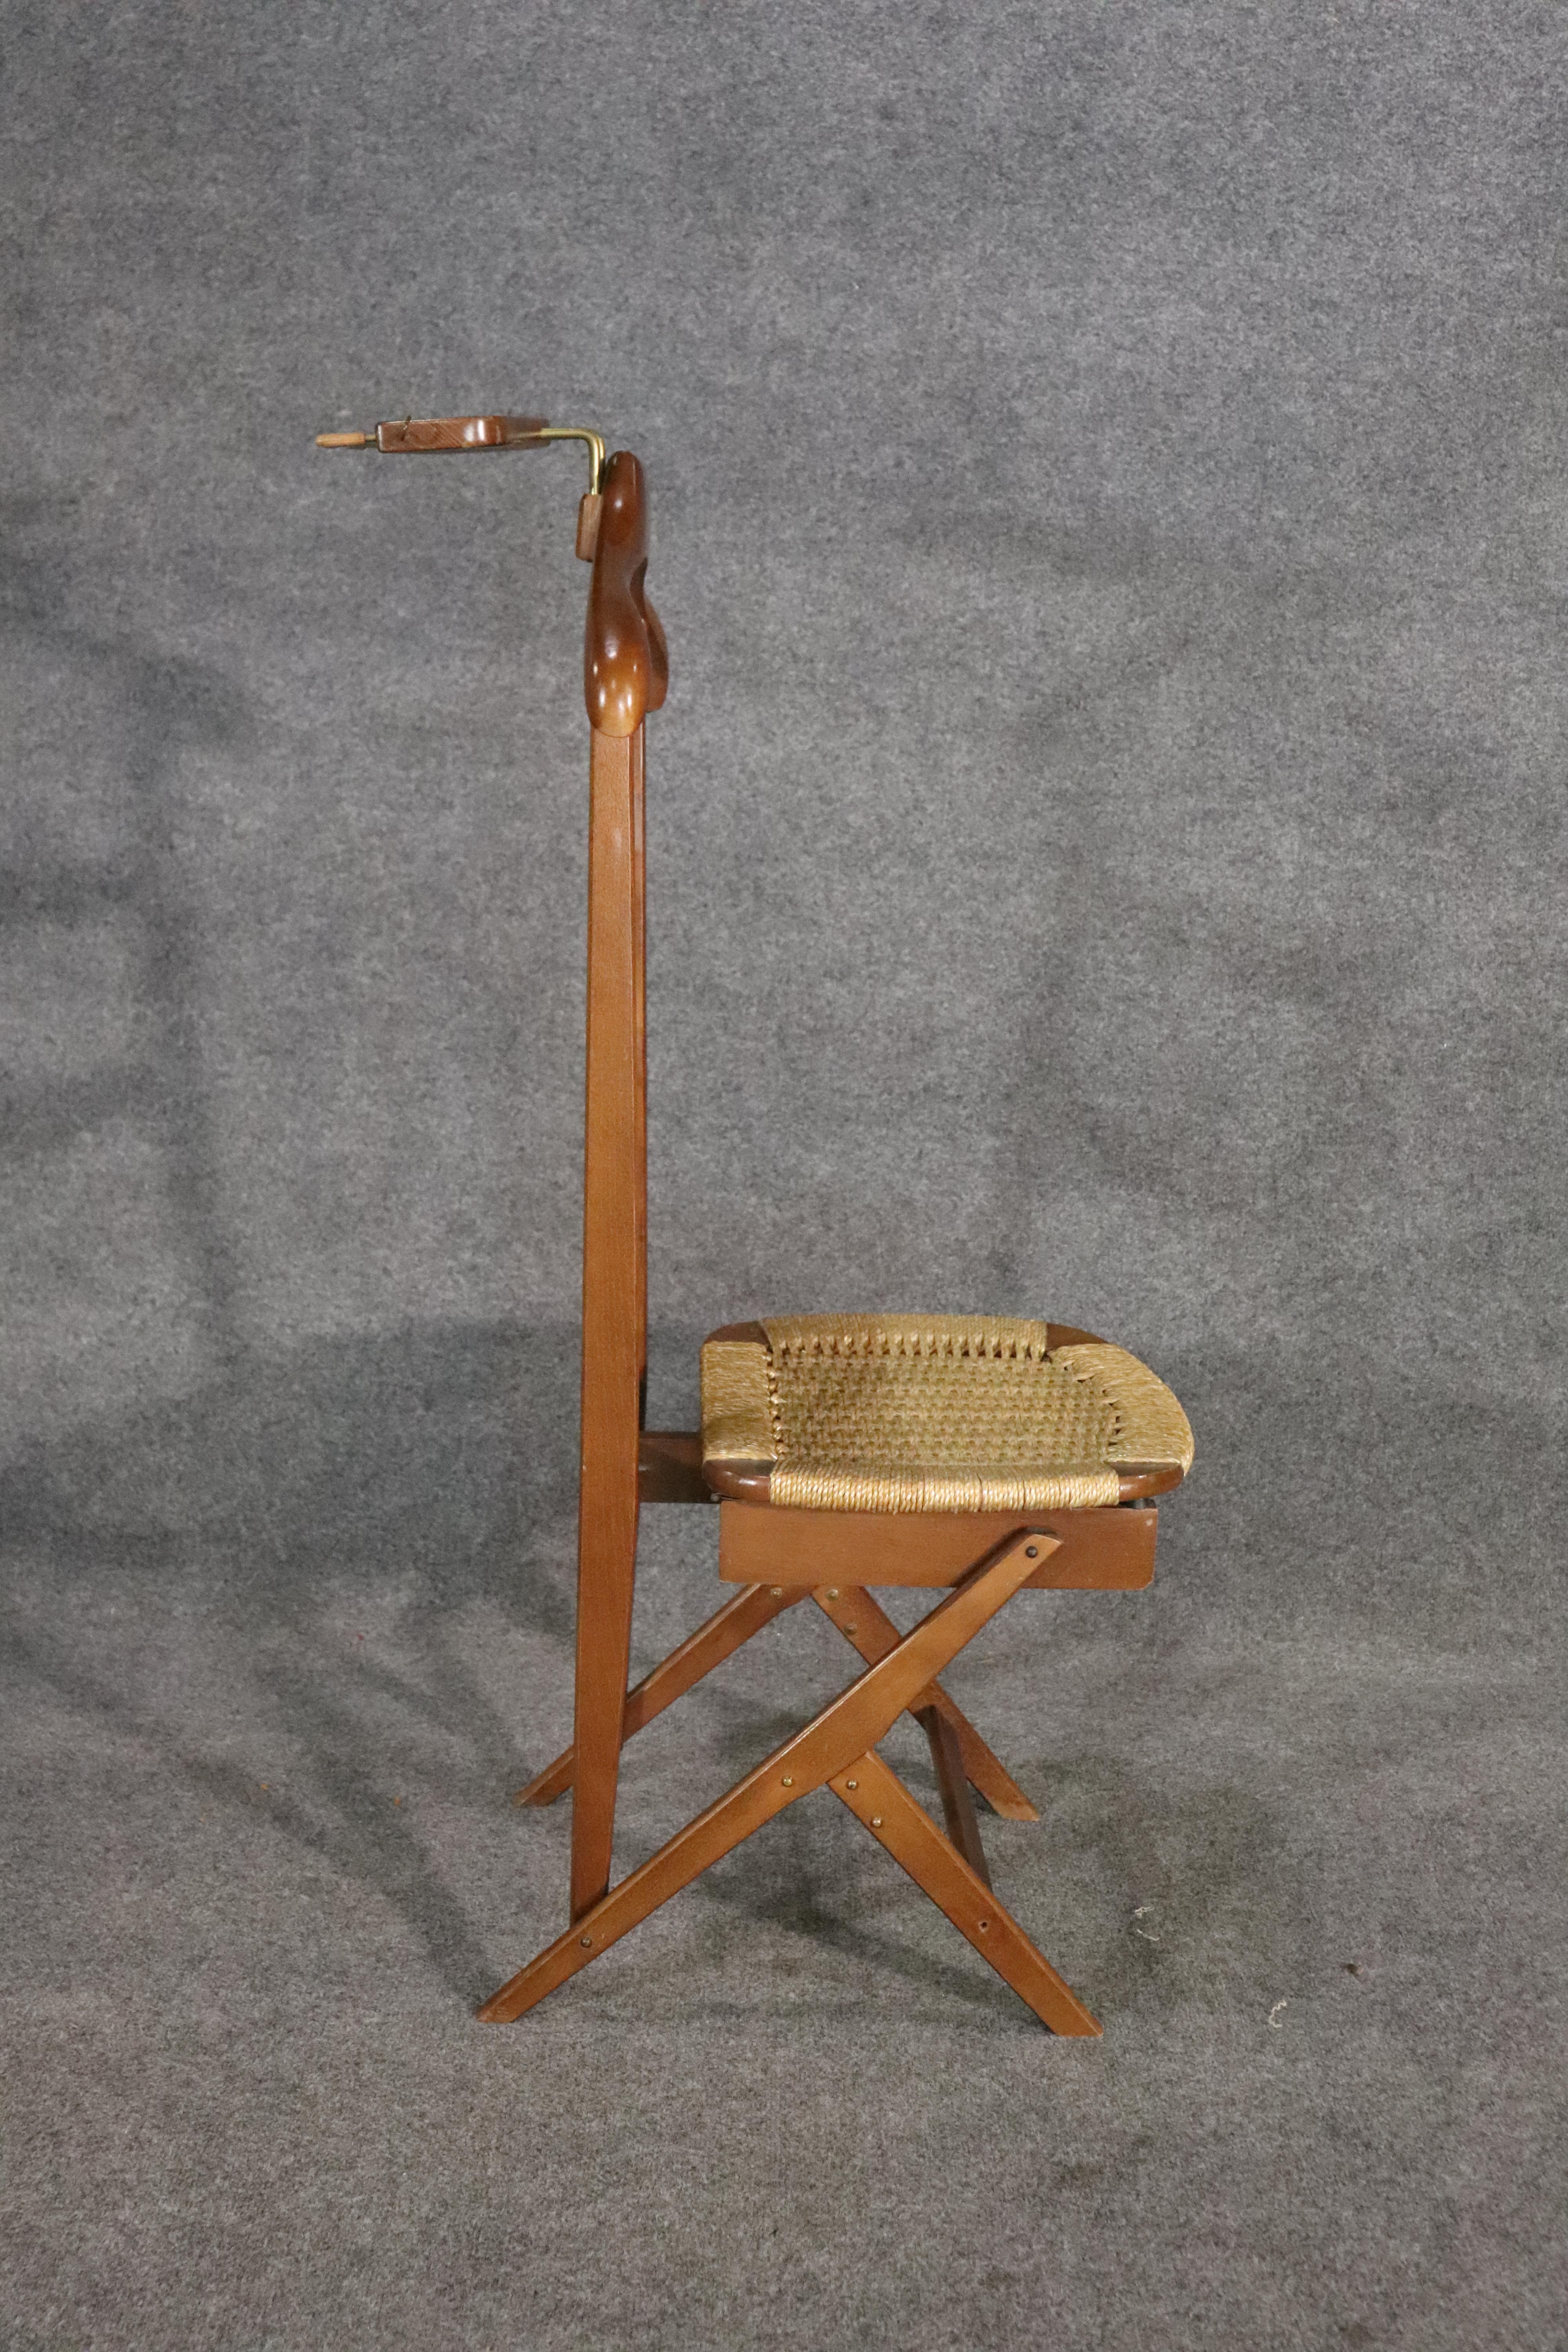 Mid-century modern butler chair by Ico Parisi and Luisa Parisi for Fratelli Regguitti.  Walnut frame with coat hanger and cuff link holder, with storage under the woven seat.
Please confirm location NY or NJ
